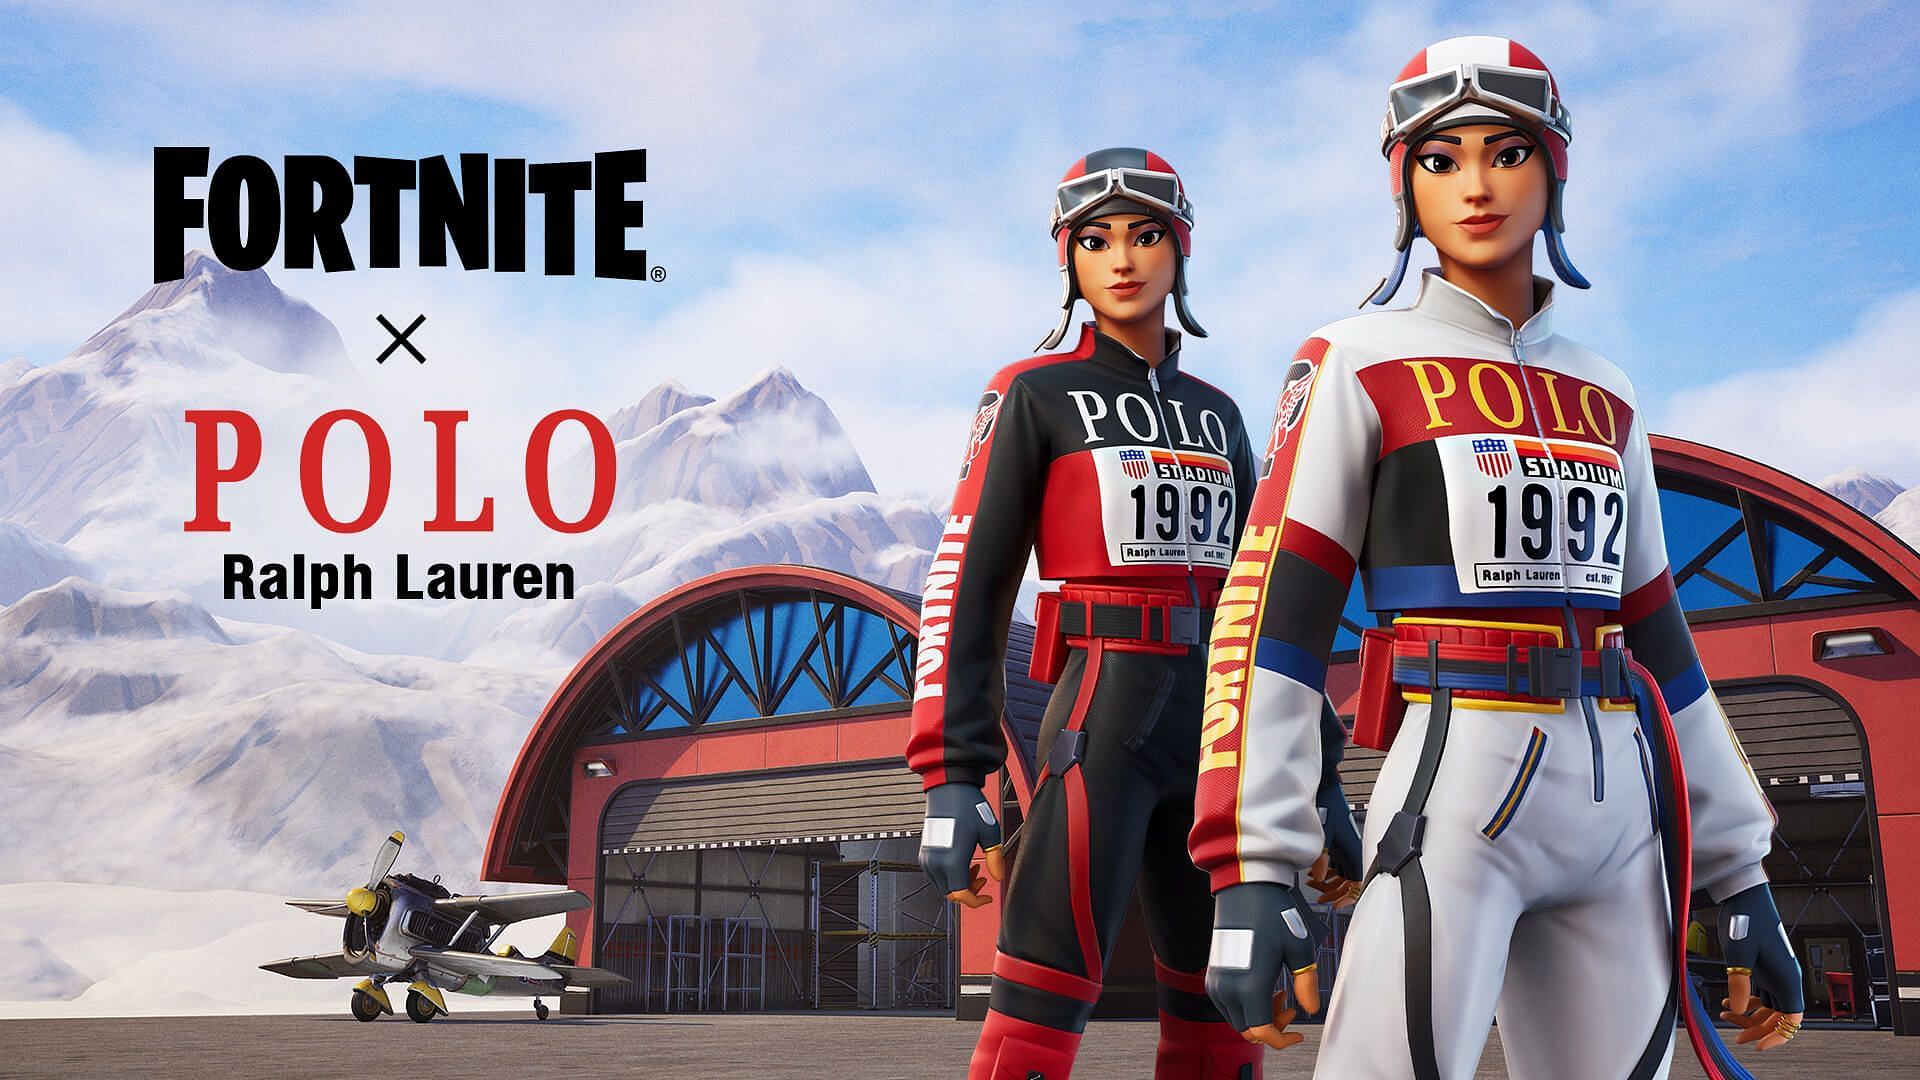 Polo Prodigy is the second skin that comes with the new Fortnite collaboration (Image via Epic Games)